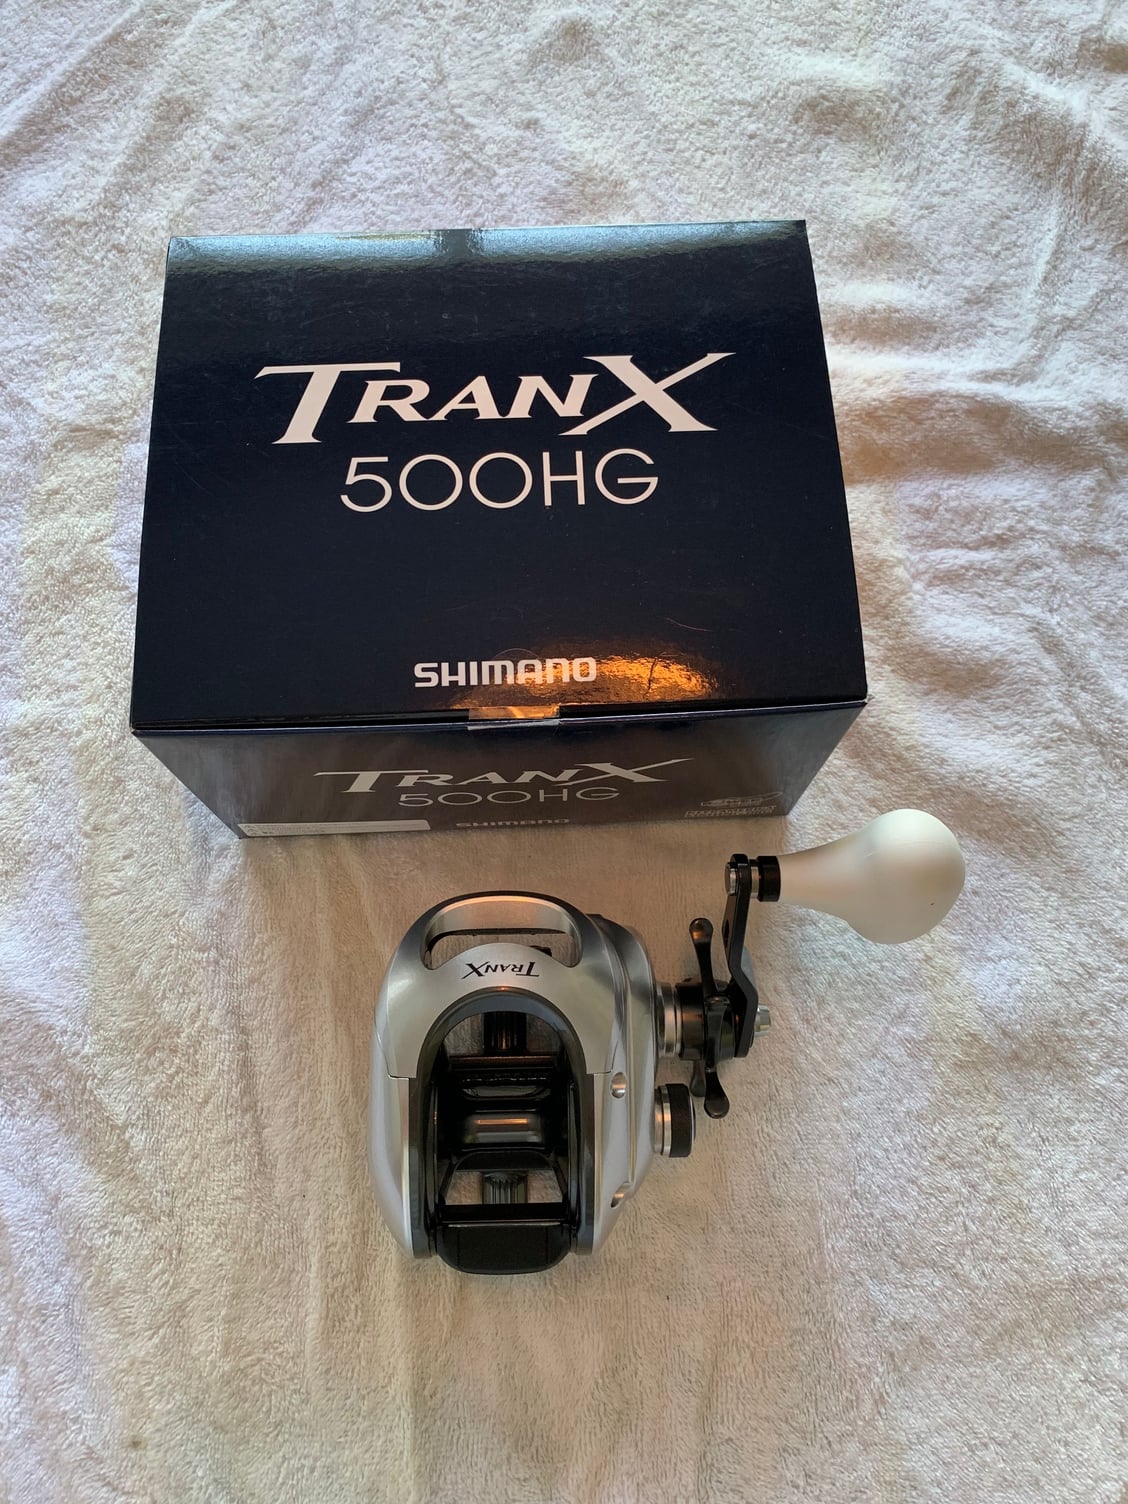 Shimano Tranx 500HG for sale - The Hull Truth - Boating and